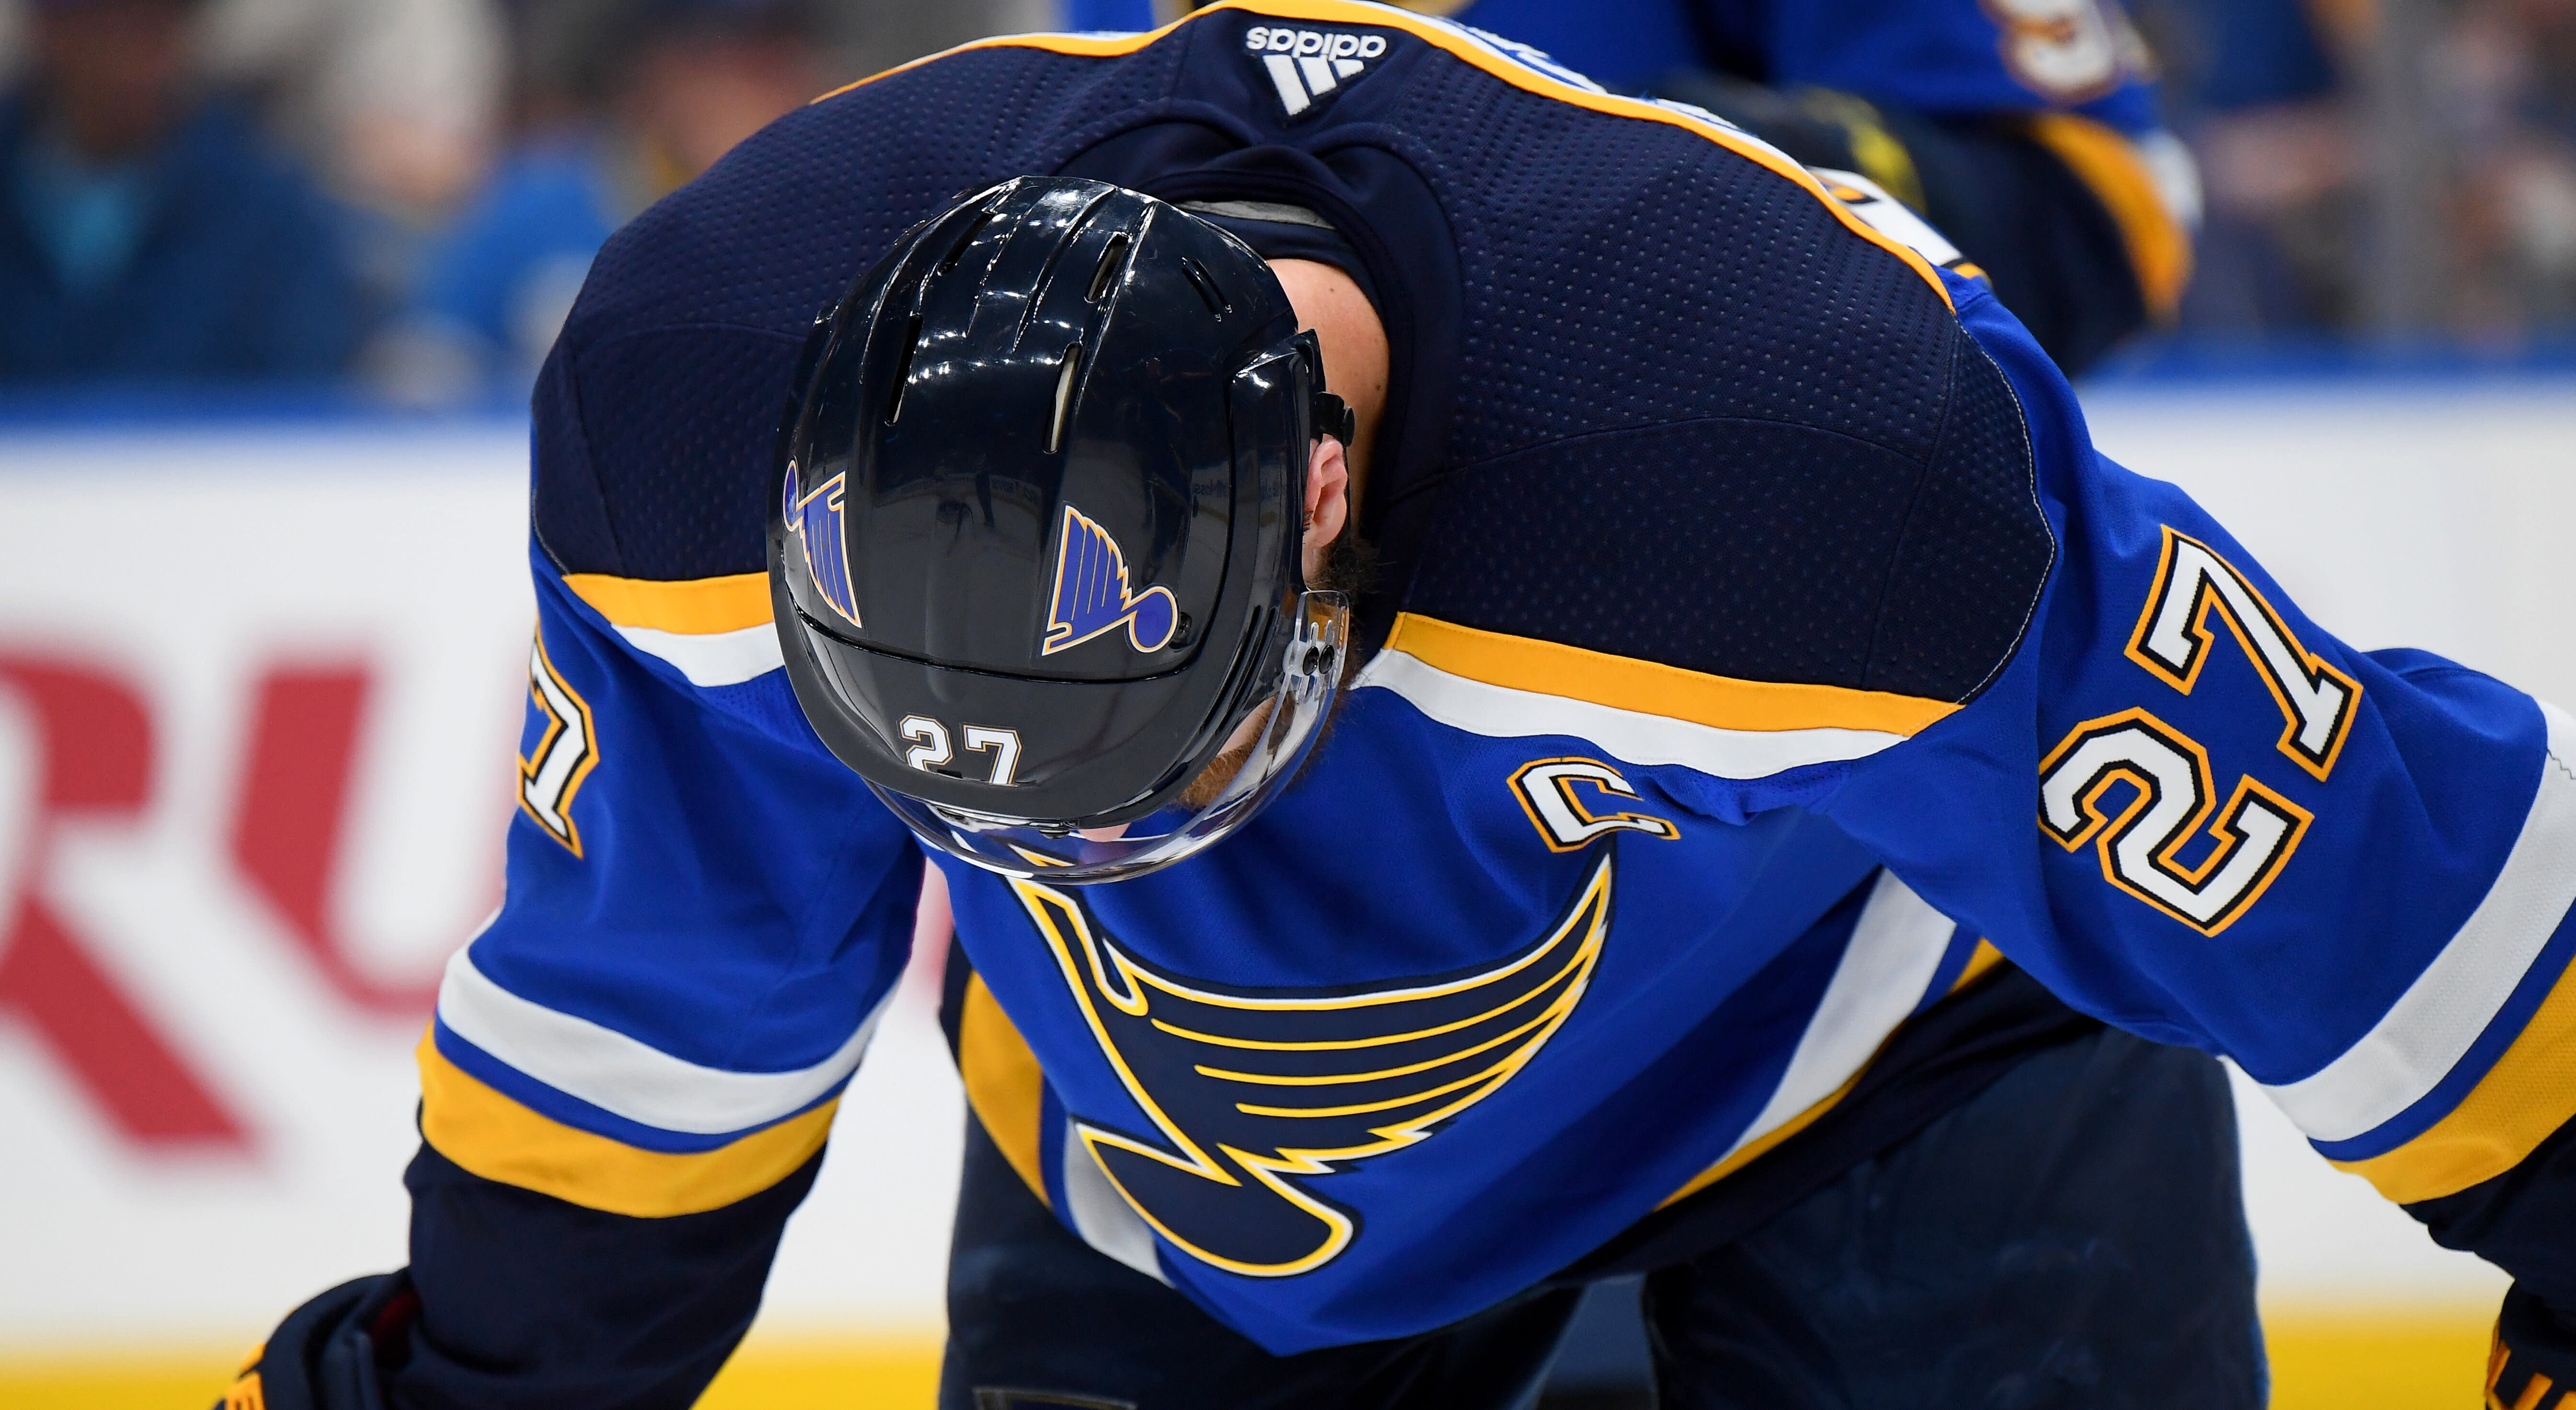 St. Louis Post-Dispatch may have jinxed the Blues before Game 6